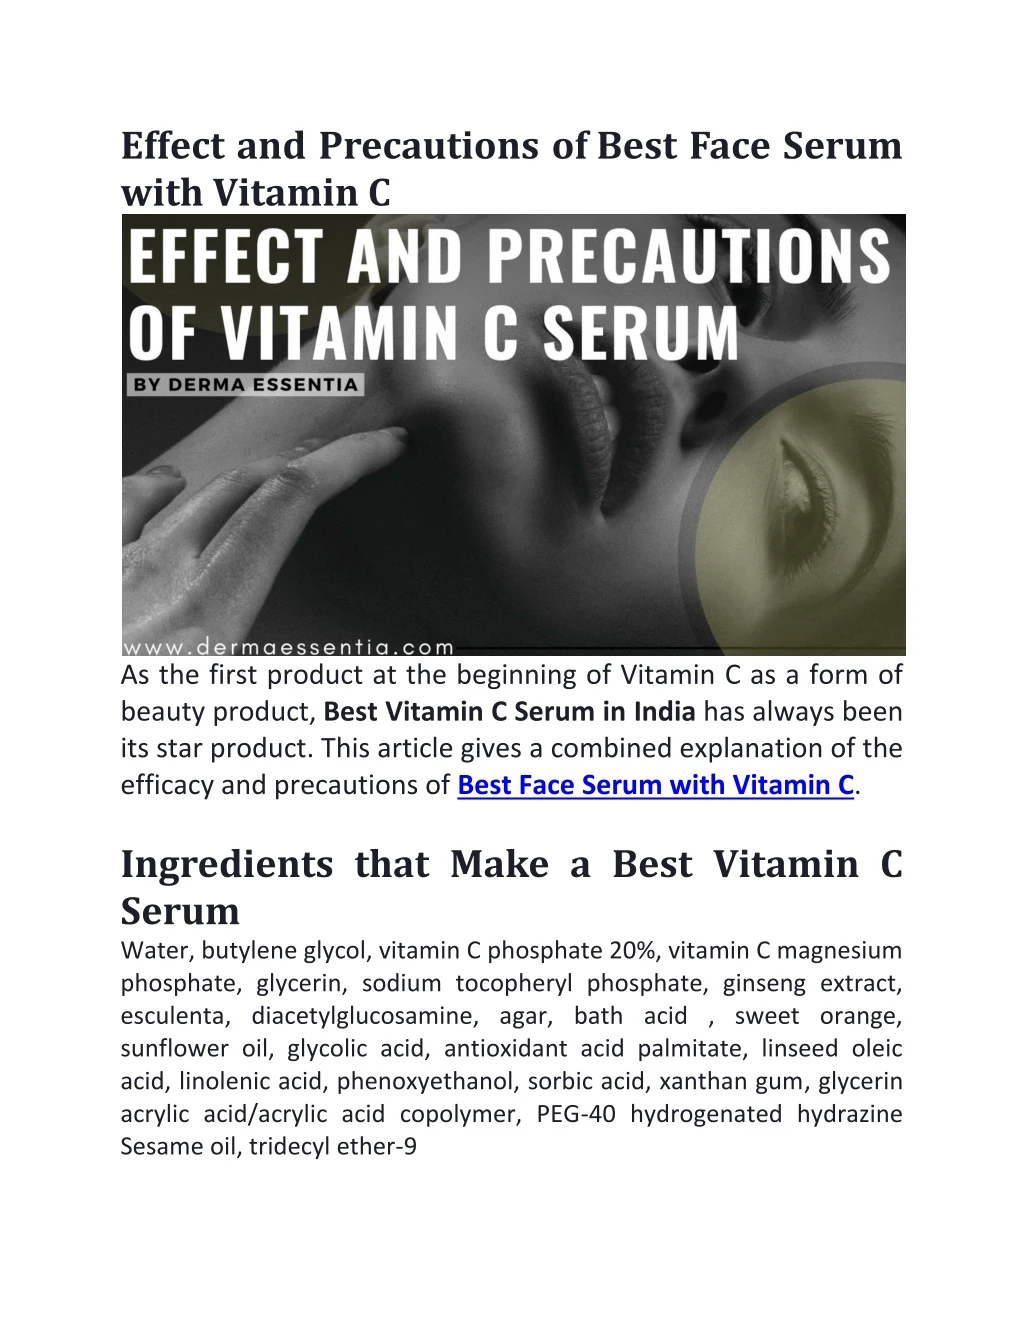 effect and precautions of best face serum with